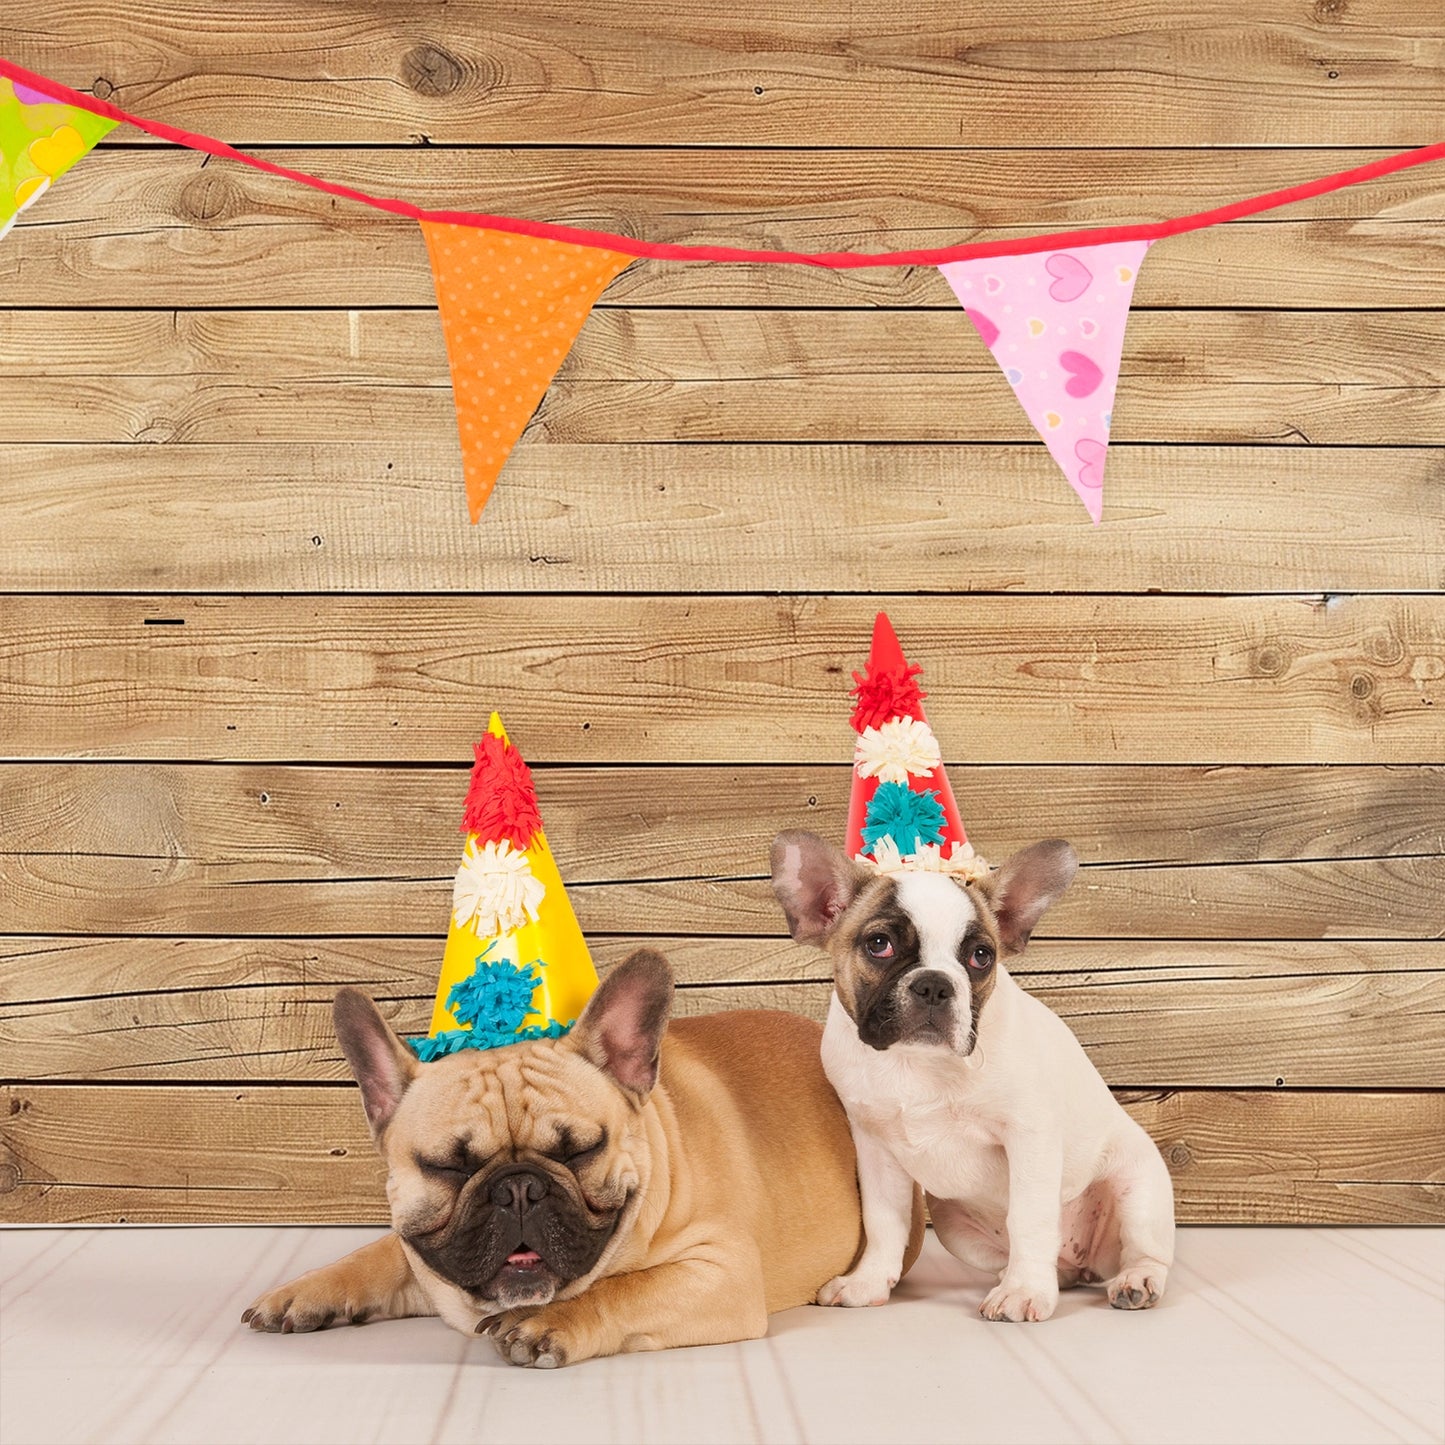 Two bulldogs wearing party hats sit in front of an ideasbackdrop 7x5ft Wooden Backdrop Baby Shower Wood Wall Background Party Decorations Props for Photographers Studio adorned with colorful triangle bunting, perfect for high-resolution printing.